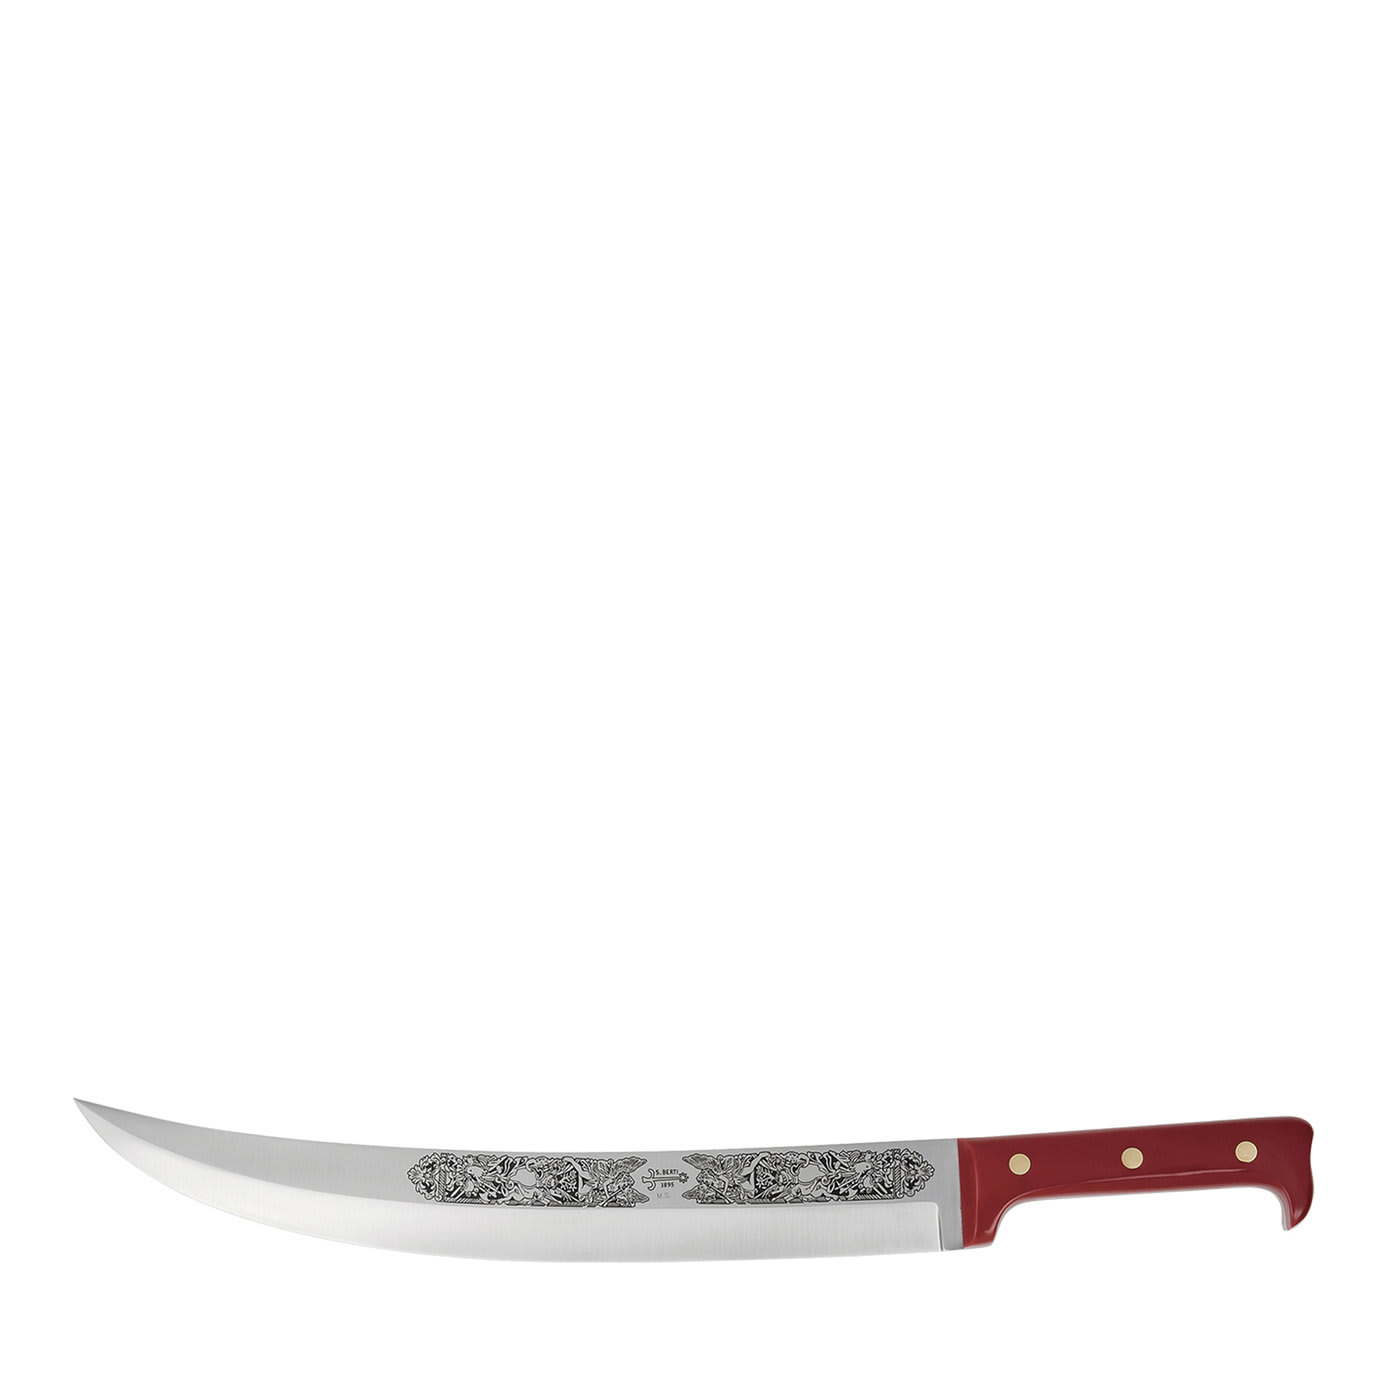 Saber Knife with Red Plaxiglass Handle - Coltellerie Berti